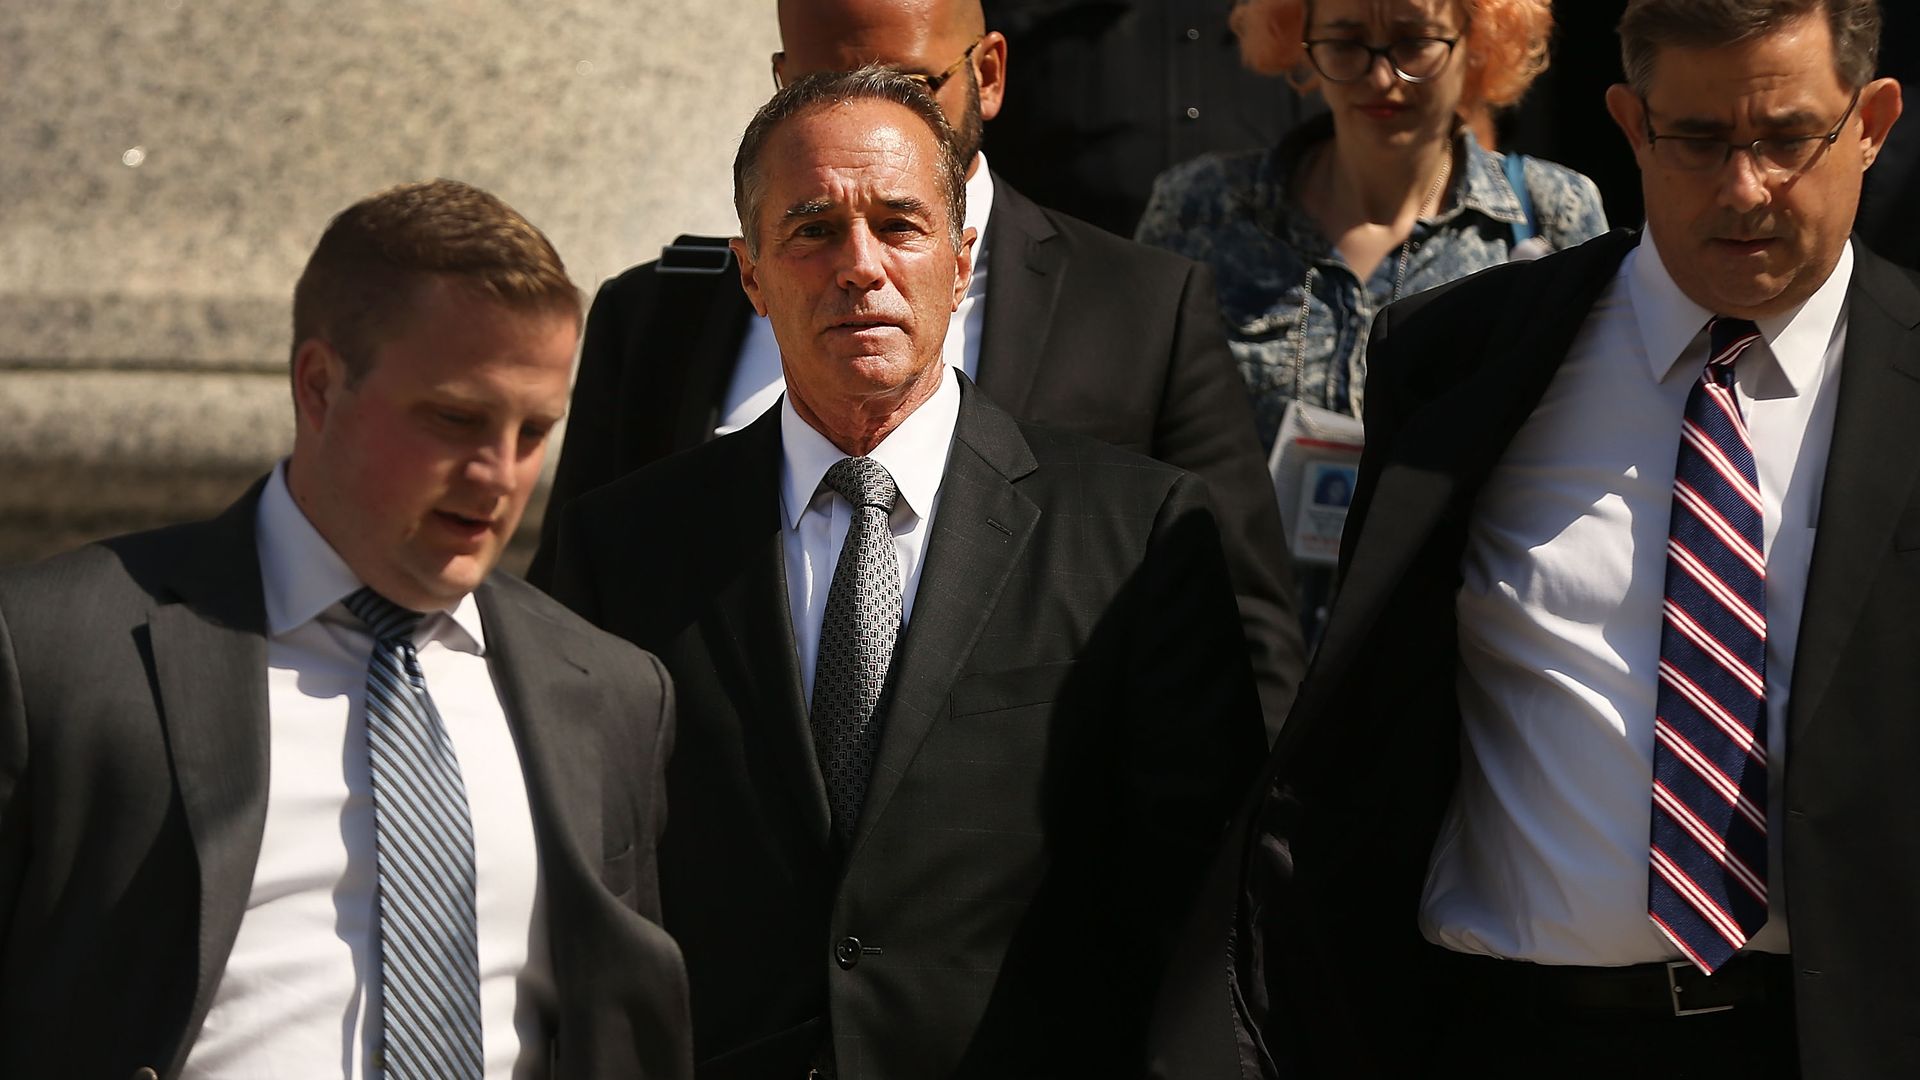 Rep. Chris Collins walking out of a court house surrounded by body guards 